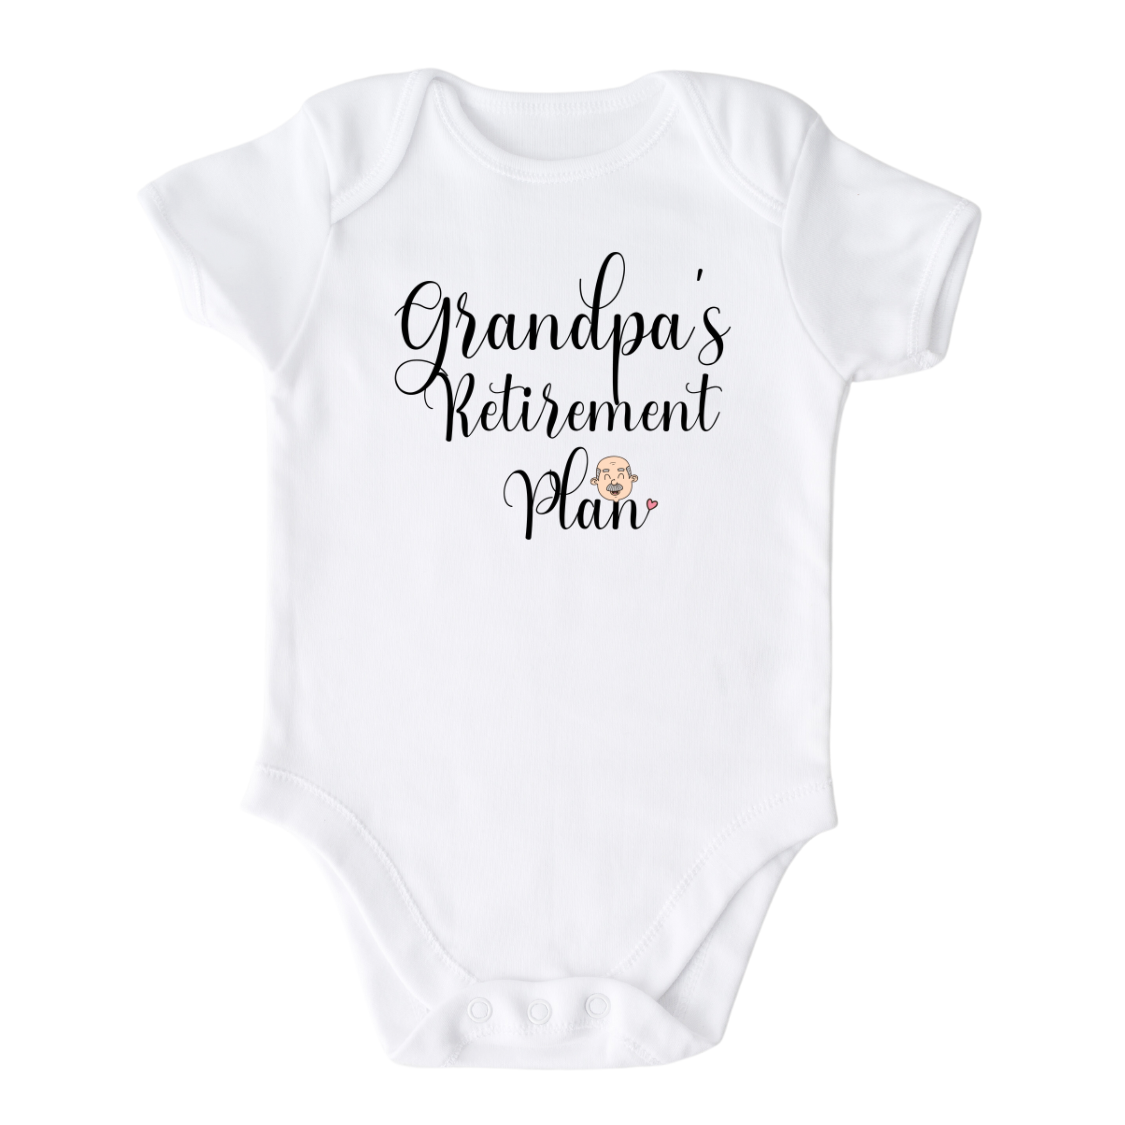 Baby onesie - kid's t-shirt with a cute printed graphic that says 'Grandpa's Retirement Plan.' The shirt features a colorful design and is made from high-quality materials. It's a perfect gift for little ones who love their grandpas and will bring joy to any child's wardrobe.